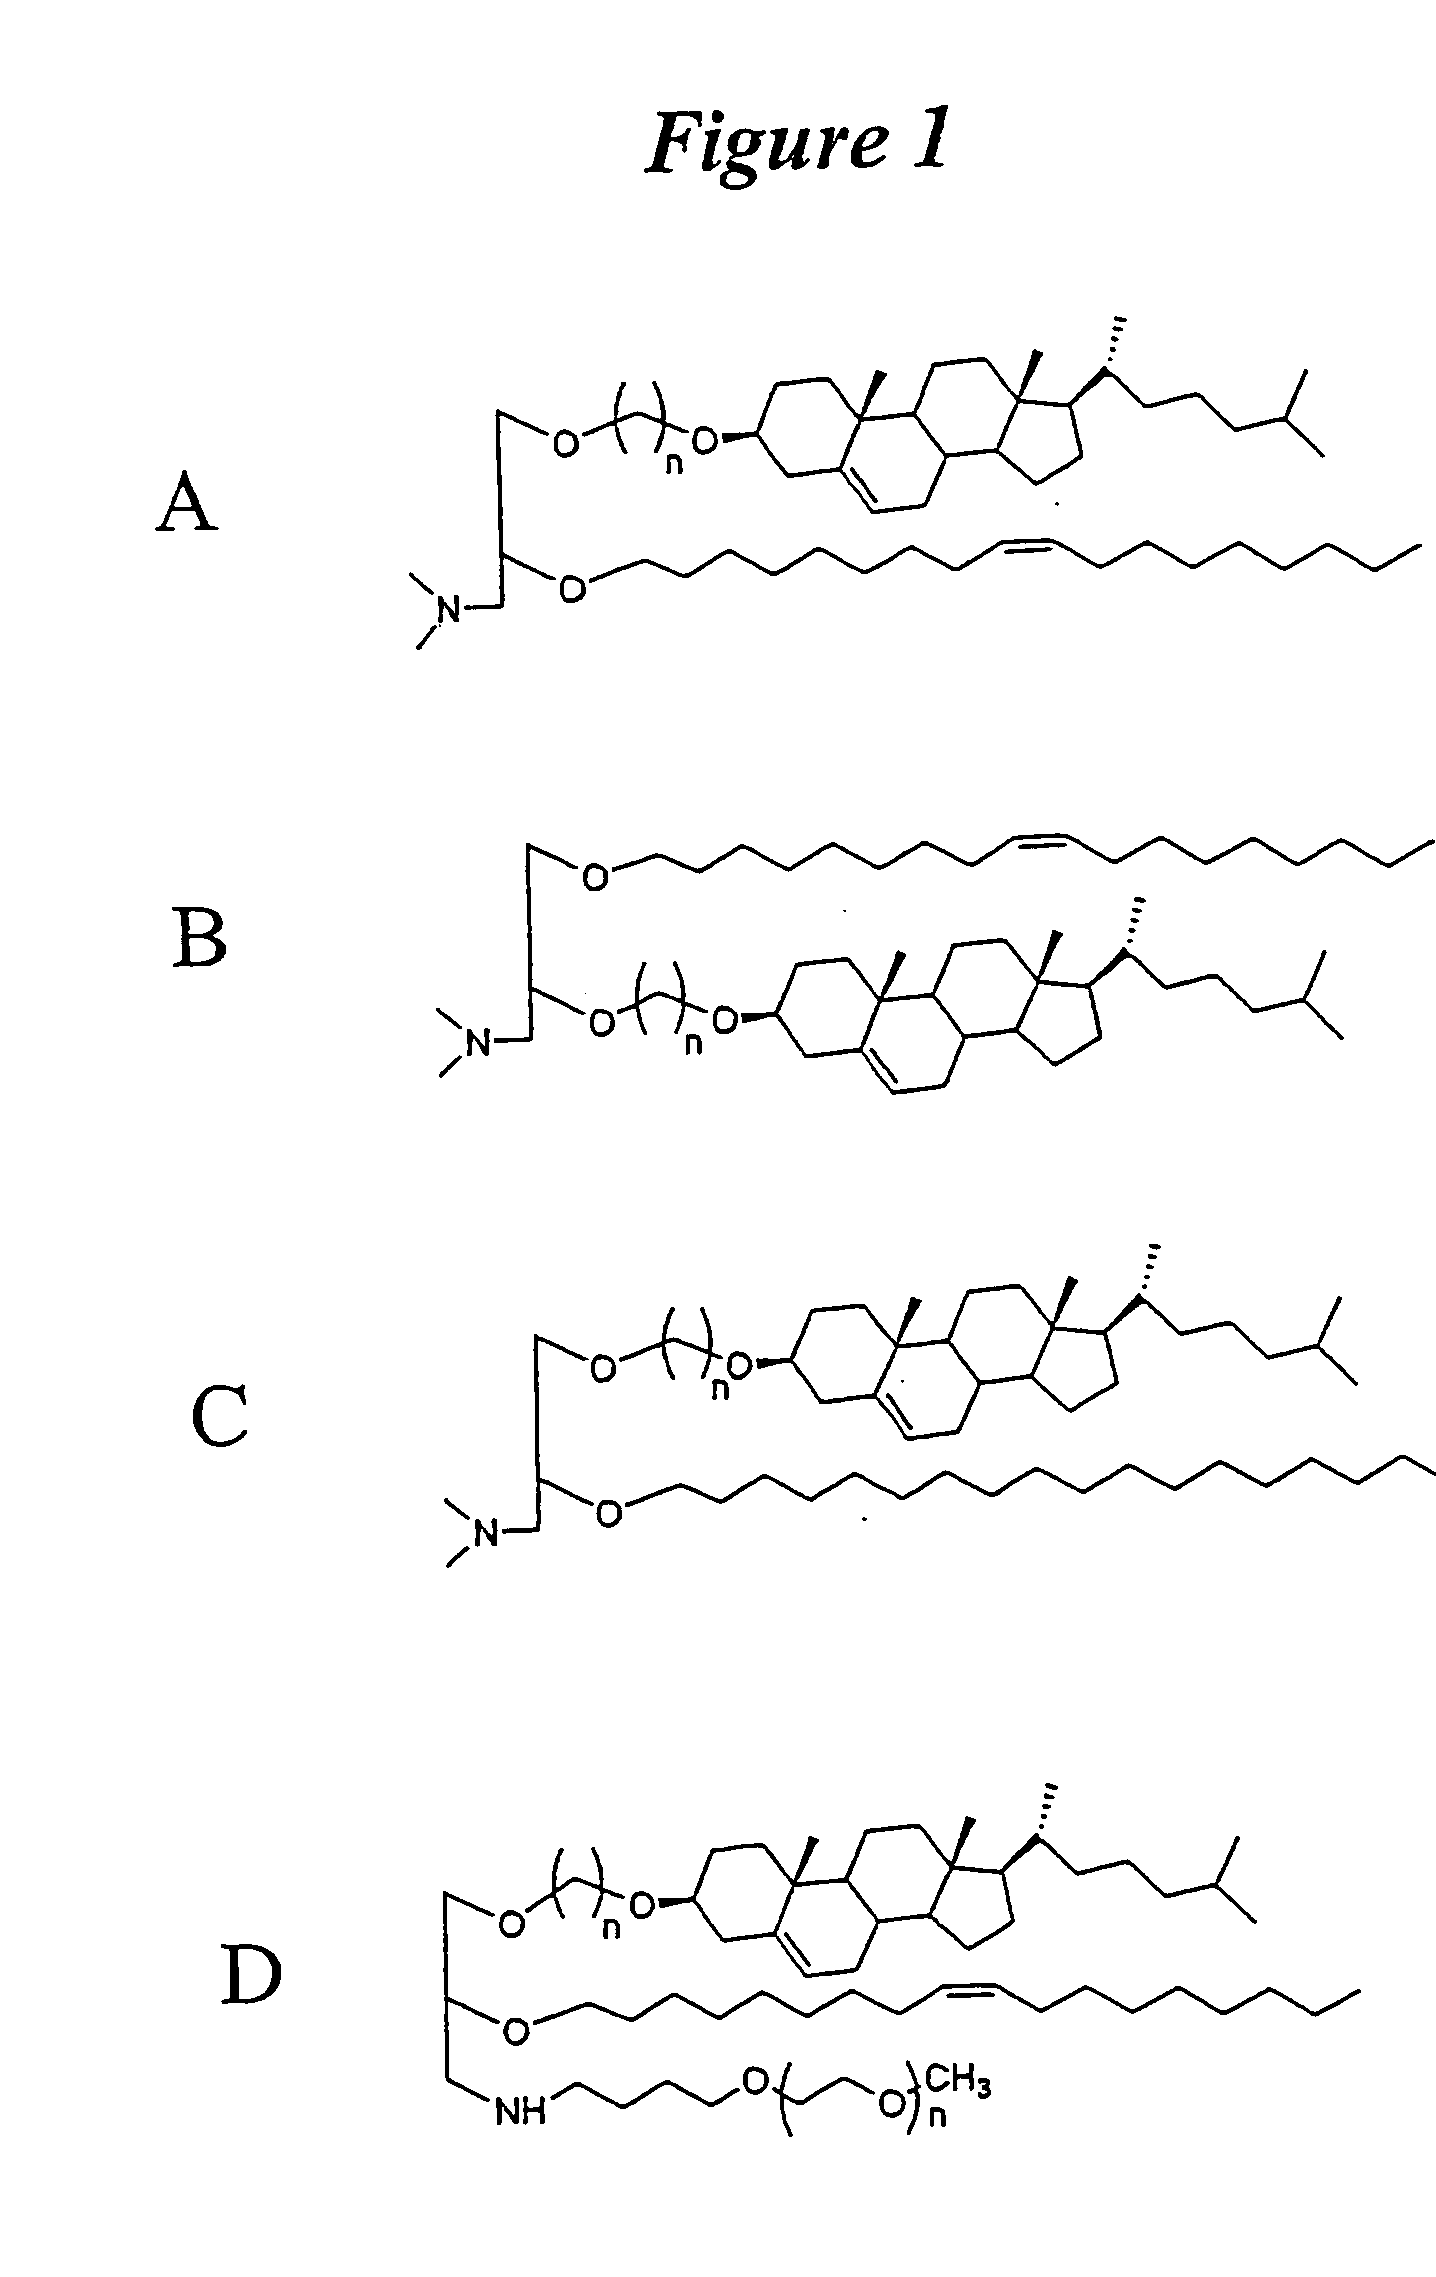 Lipid nanoparticle based compositions and methods for the delivery of biologically active molecules